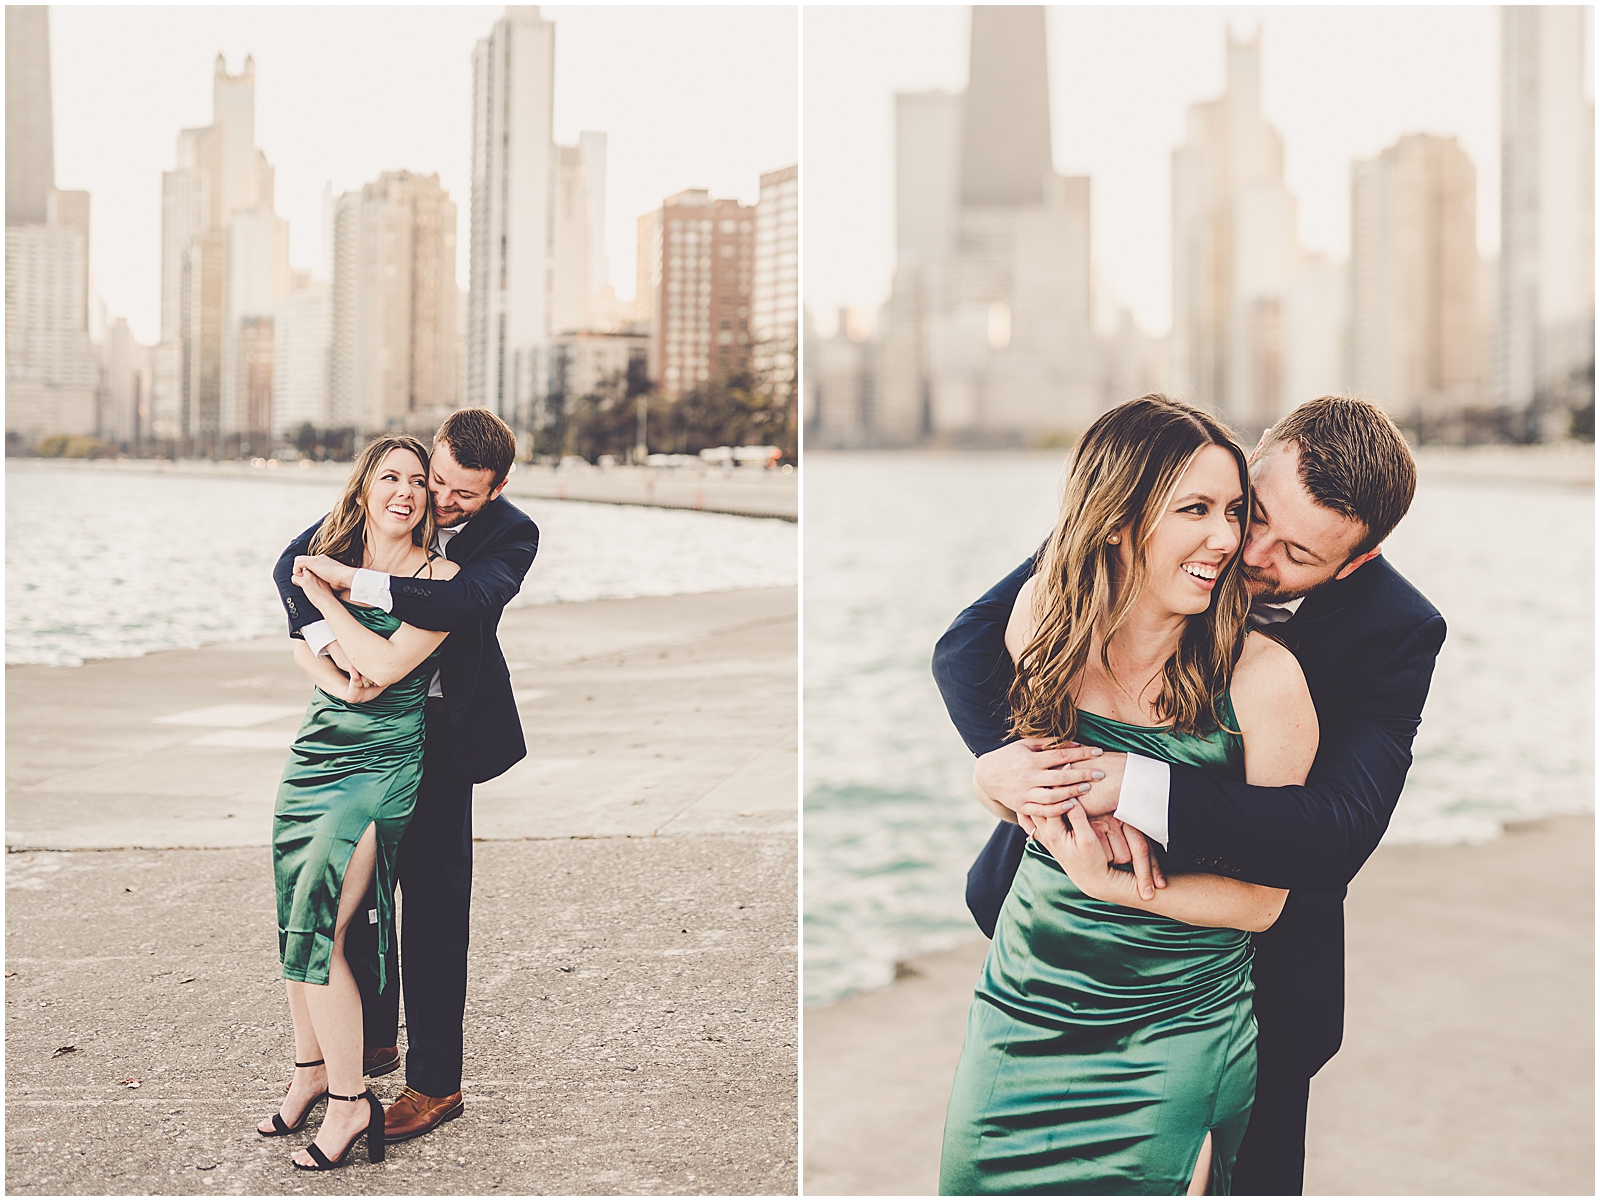 Elaine and Chris's Lincoln Park engagement photos in Chicago, Illinois with Chicagoland wedding photographer Kara Evans Photographer.